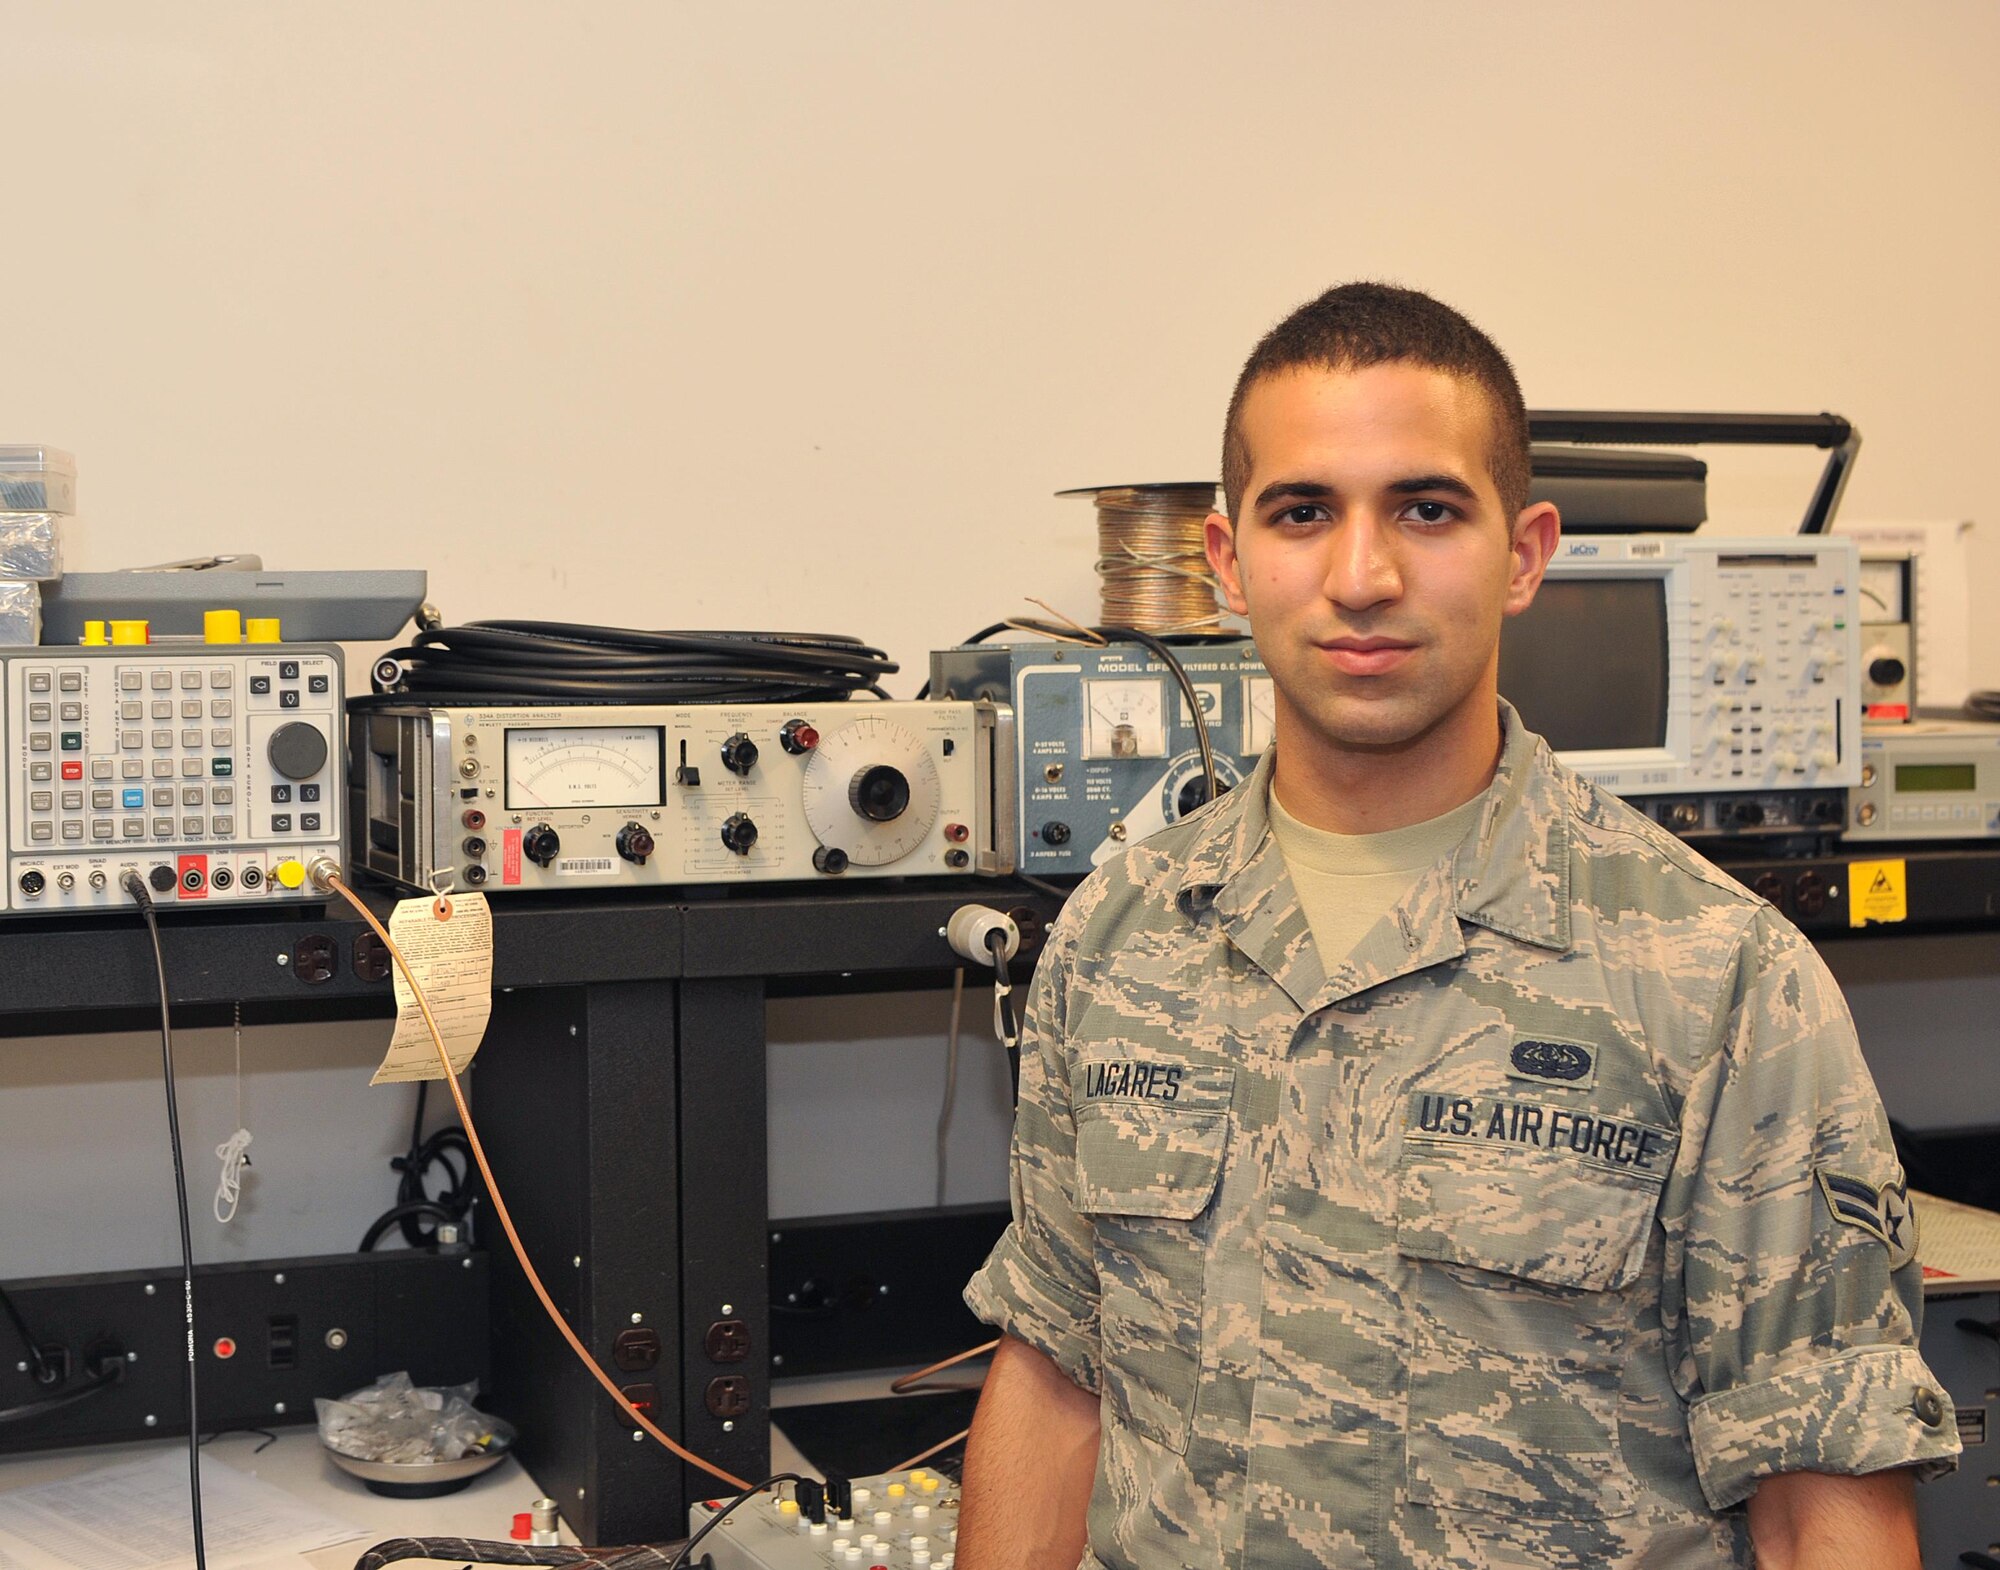 Airman 1st Class Luca Lagares, 9th Communications Squadron radio frequency transmission technician, poses for a photo June 21, 2017 at Beale Air Force Base, California. (U.S. Air Force photo/Airman 1st Class Tristan D. Viglianco)